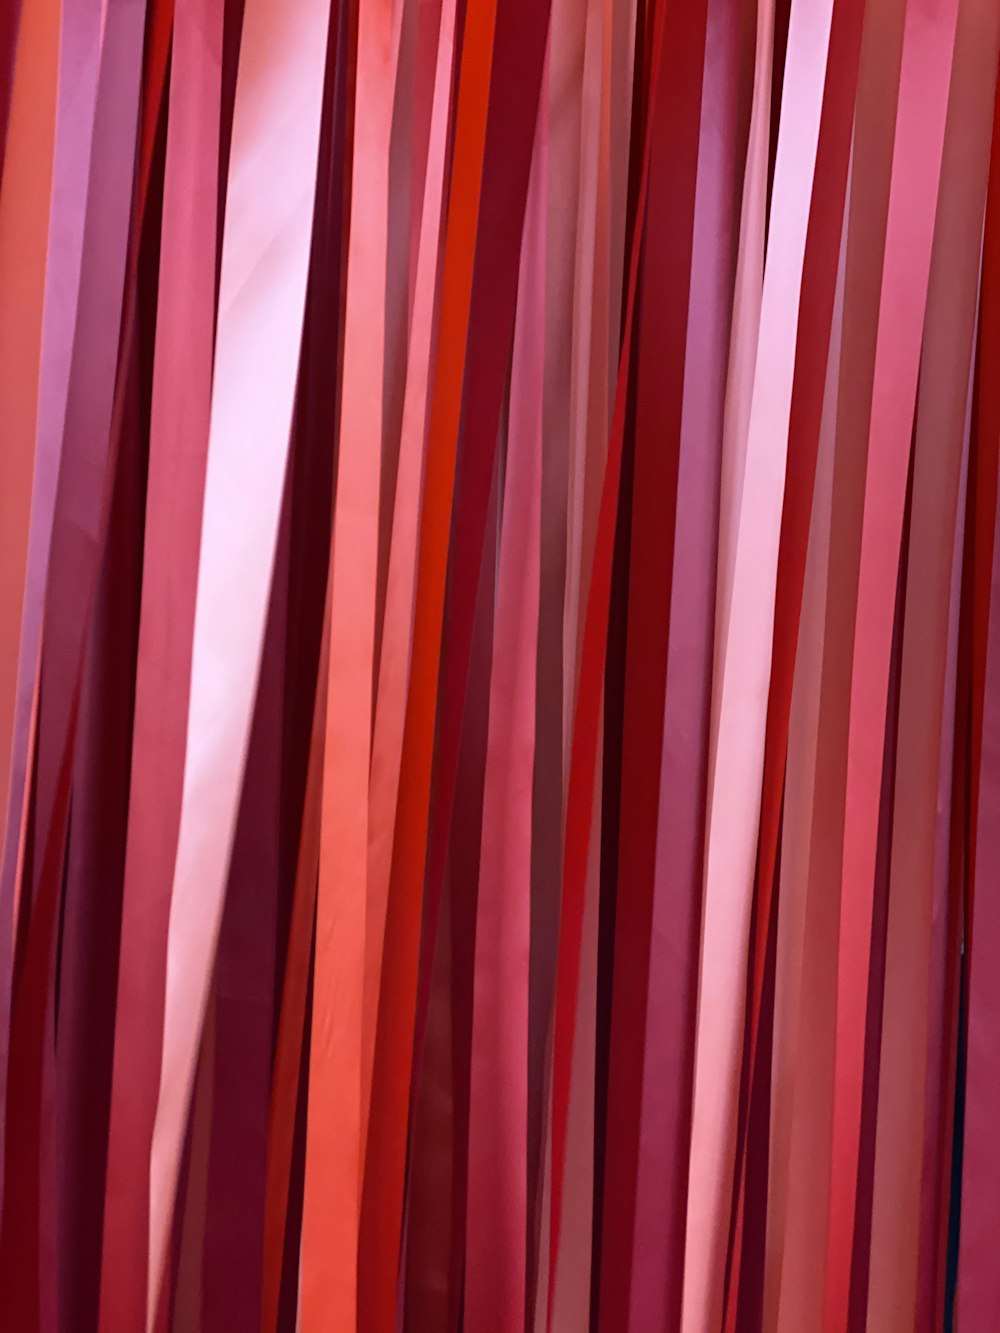 pink and white striped textile